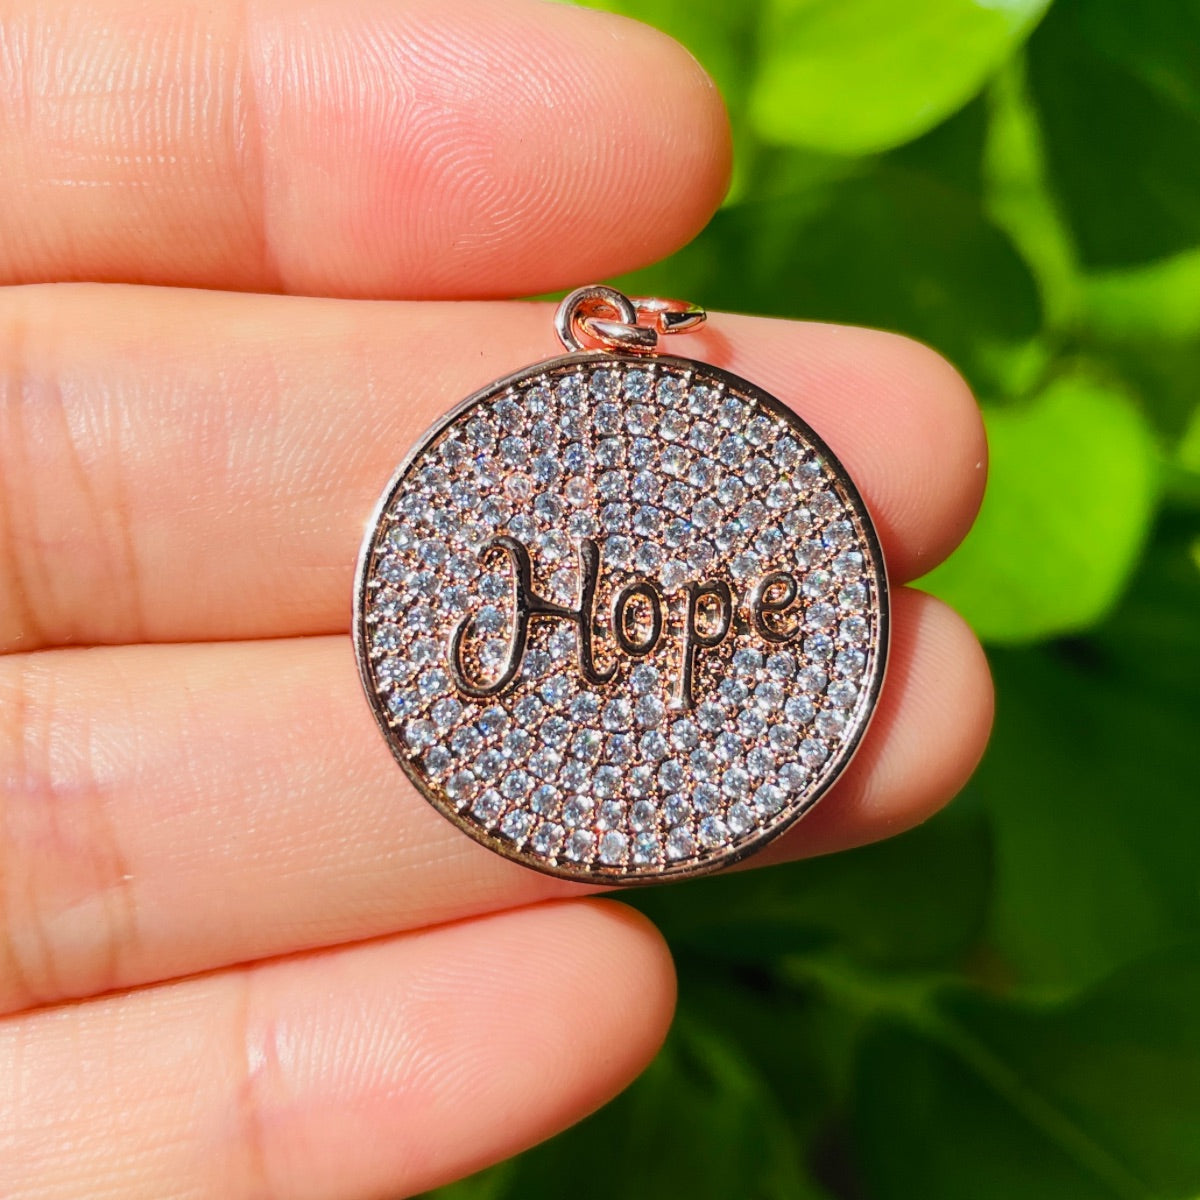 10pcs/lot 25mm CZ Pave Round Plate HOPE Quote Charms Rose Gold CZ Paved Charms Christian Quotes Discs On Sale Charms Beads Beyond